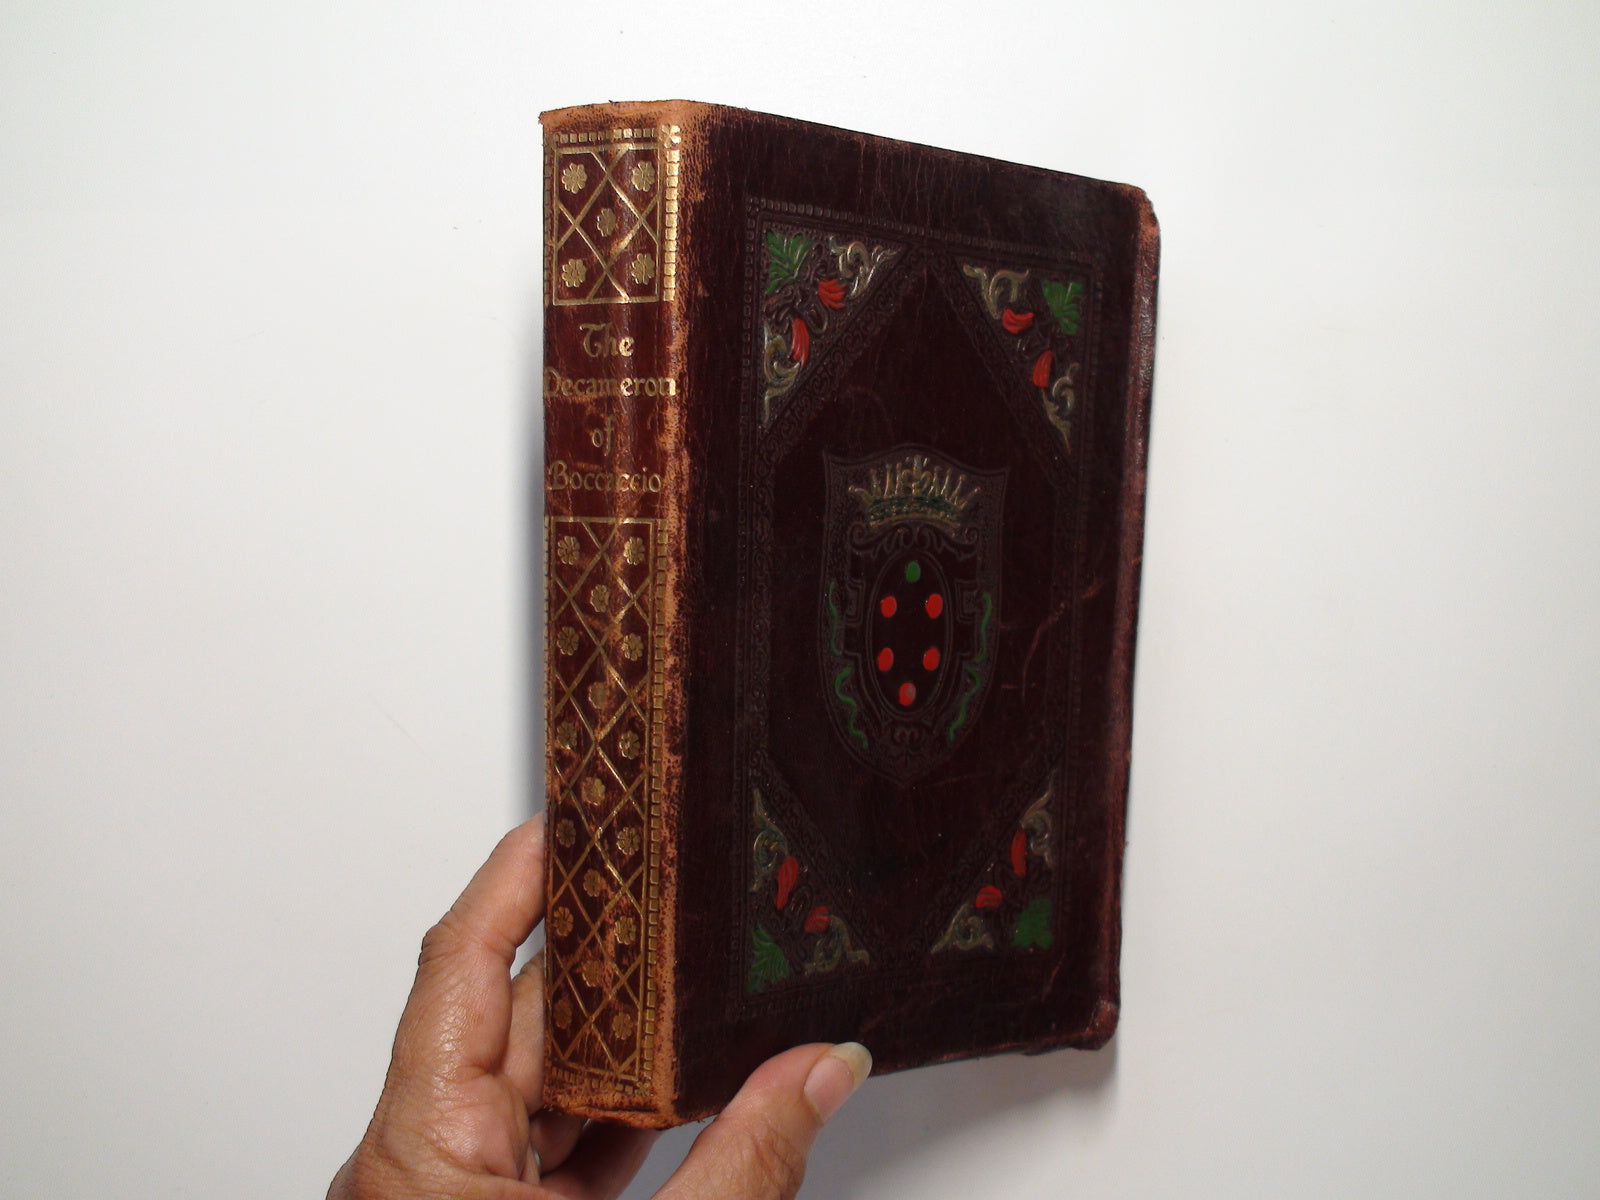 The Decameron of Giovanni Boccaccio, Translated by Payne, Leather, Rare, c1920s